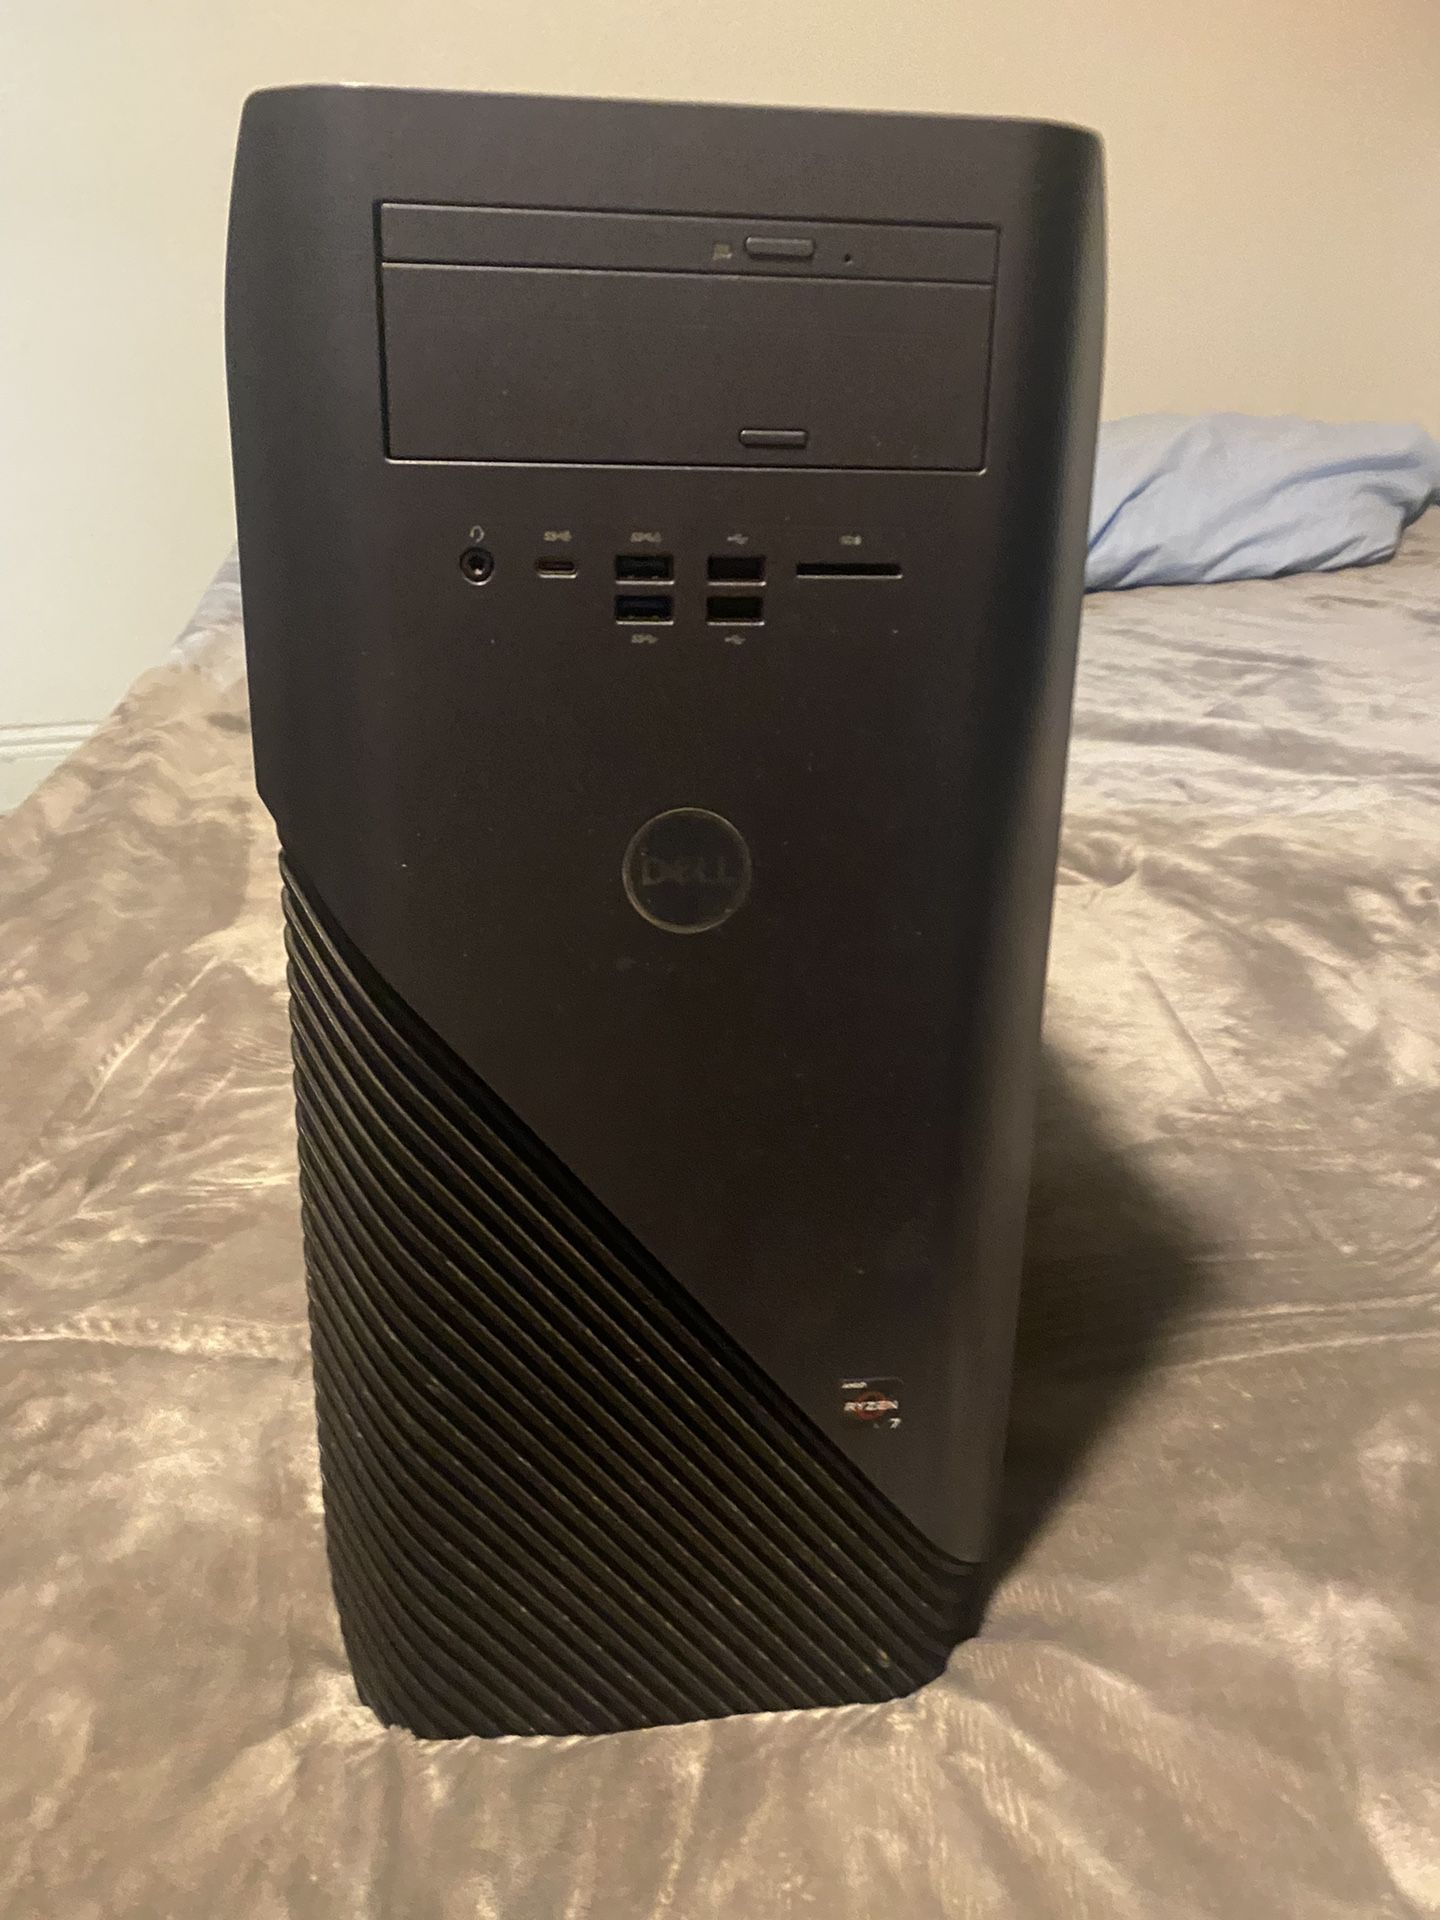 Dell i5680 pc (SEND BEST OFFER)